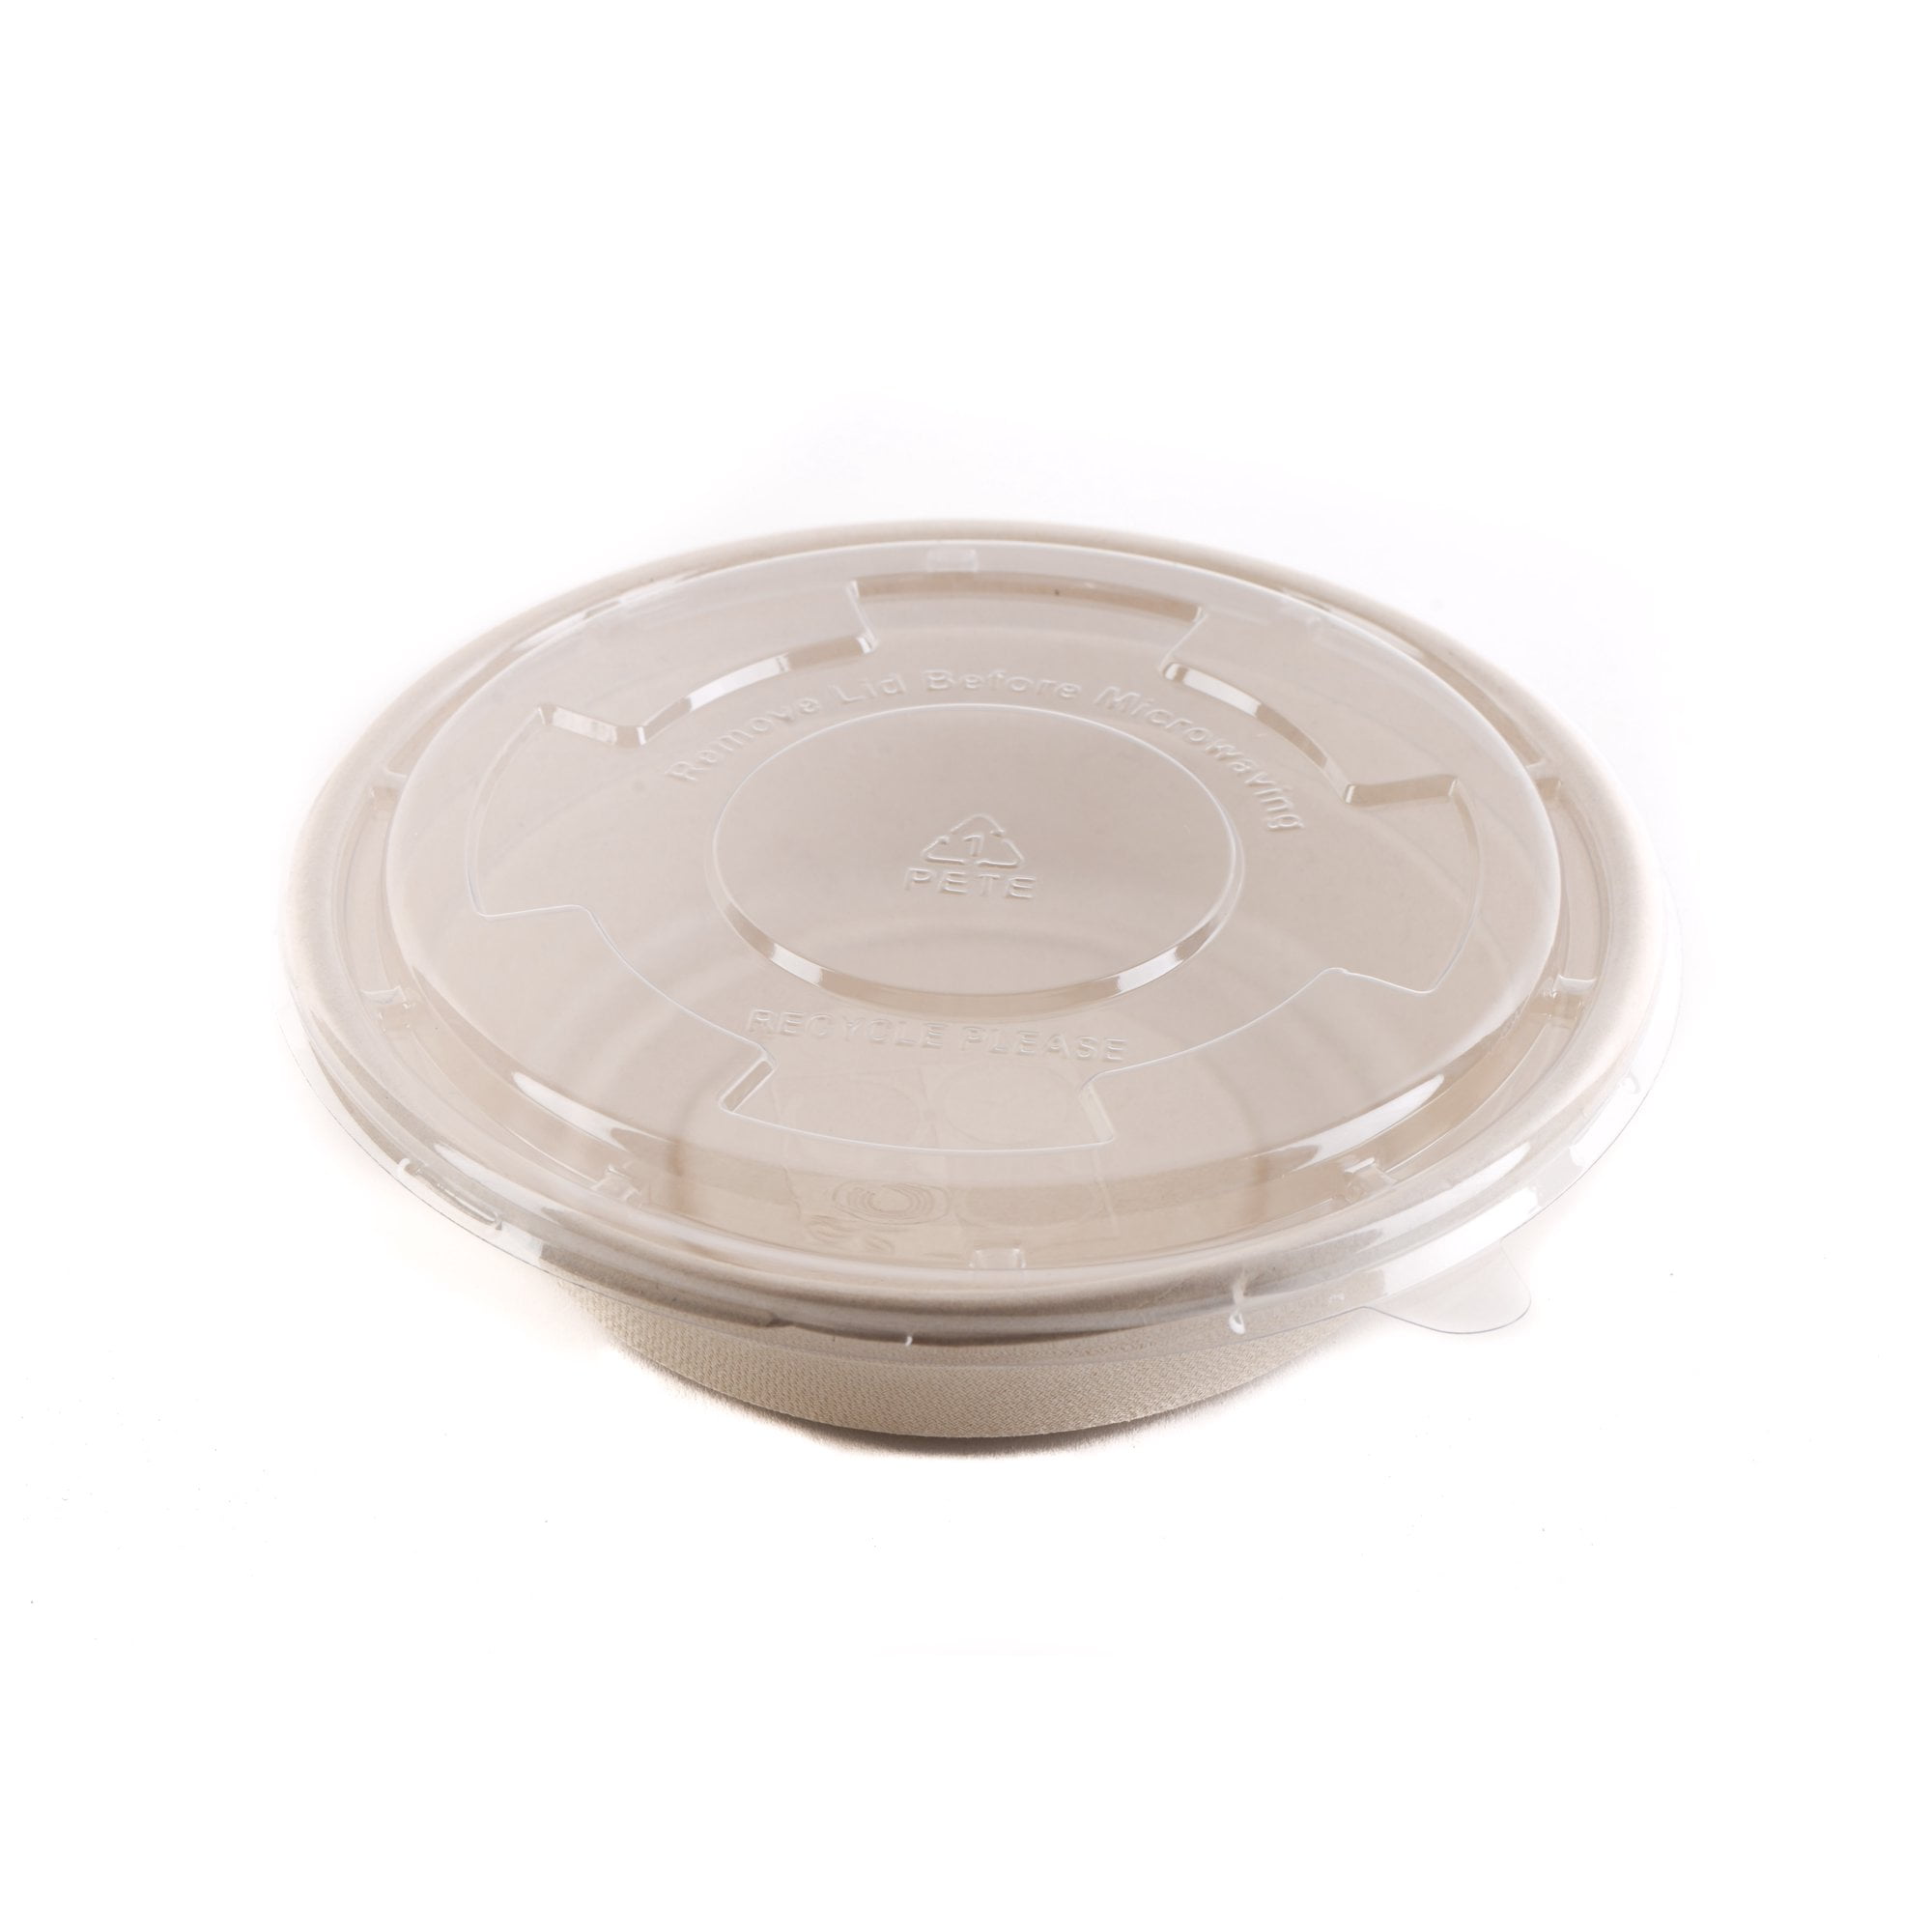  JAYEEY 47OZ Disposable bowls with lids, Sugarcane